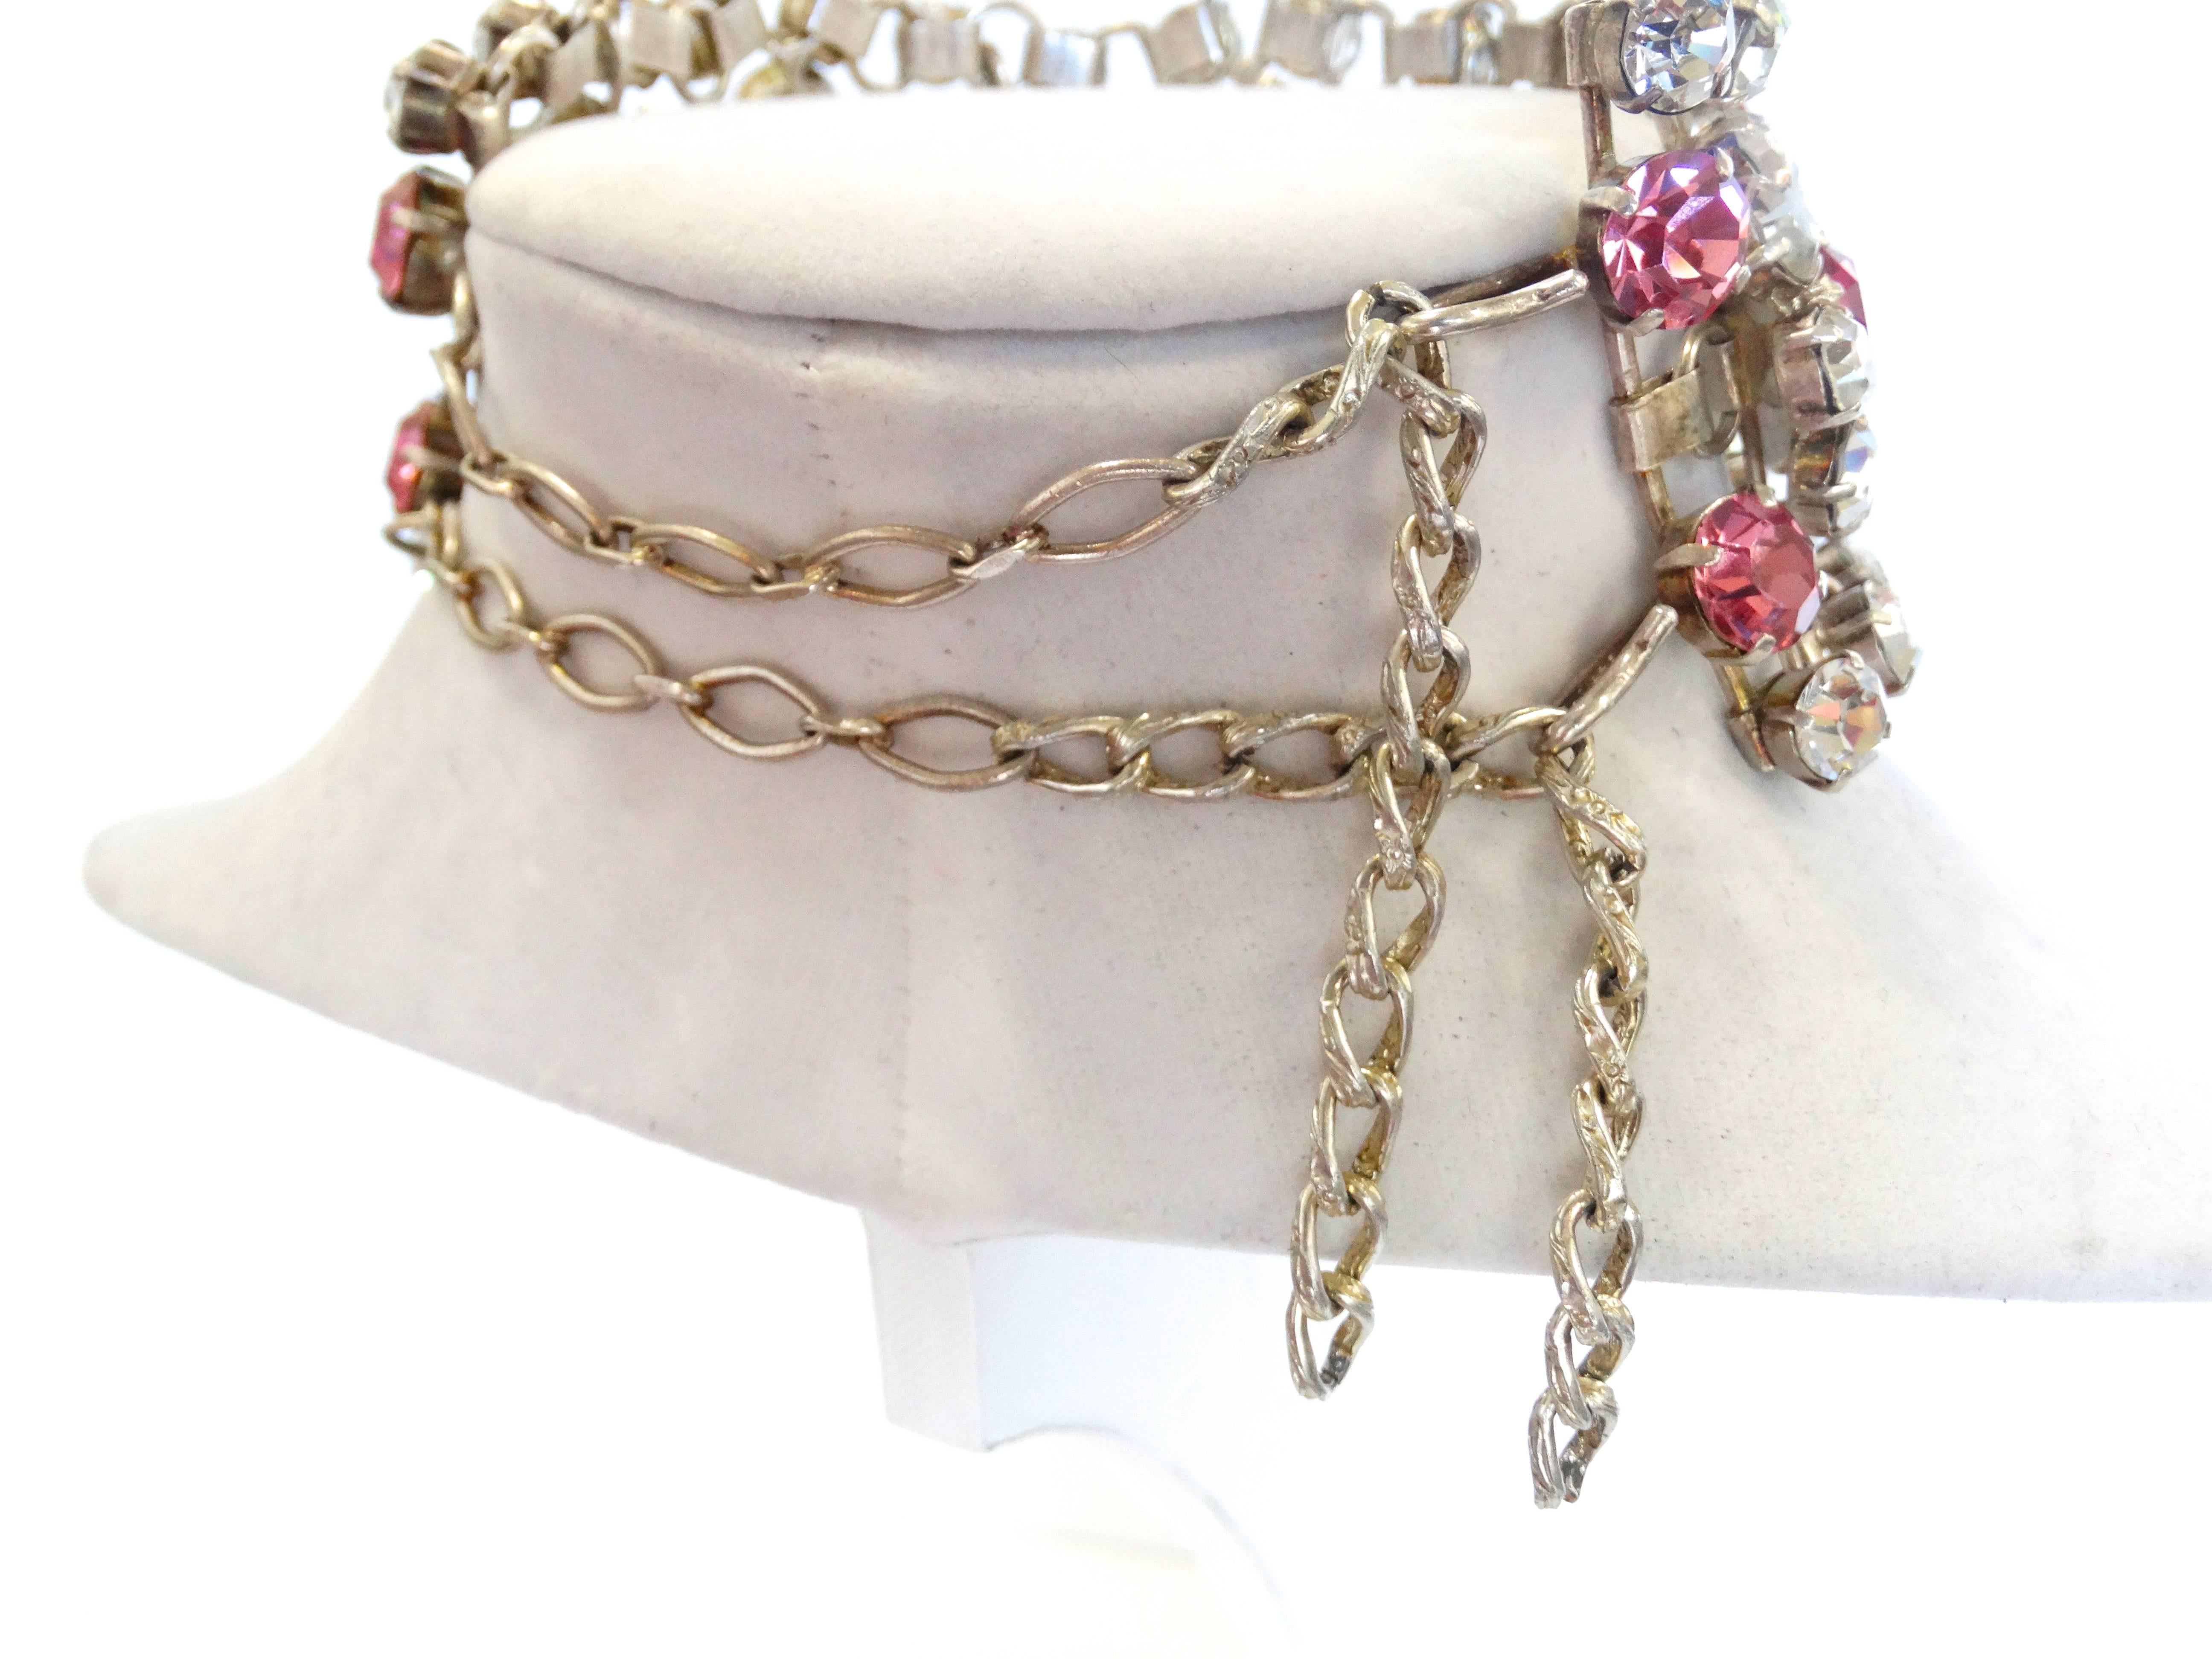 Show stopping Pink and Clear rhinestone choker necklace from the 1960s! Clear and bright pink rhinestone gems on silver hardware, floral pattern in center. Two hook closures at the back of the neck. Simply stunning on!!!

2.4 inches Width
15 inches